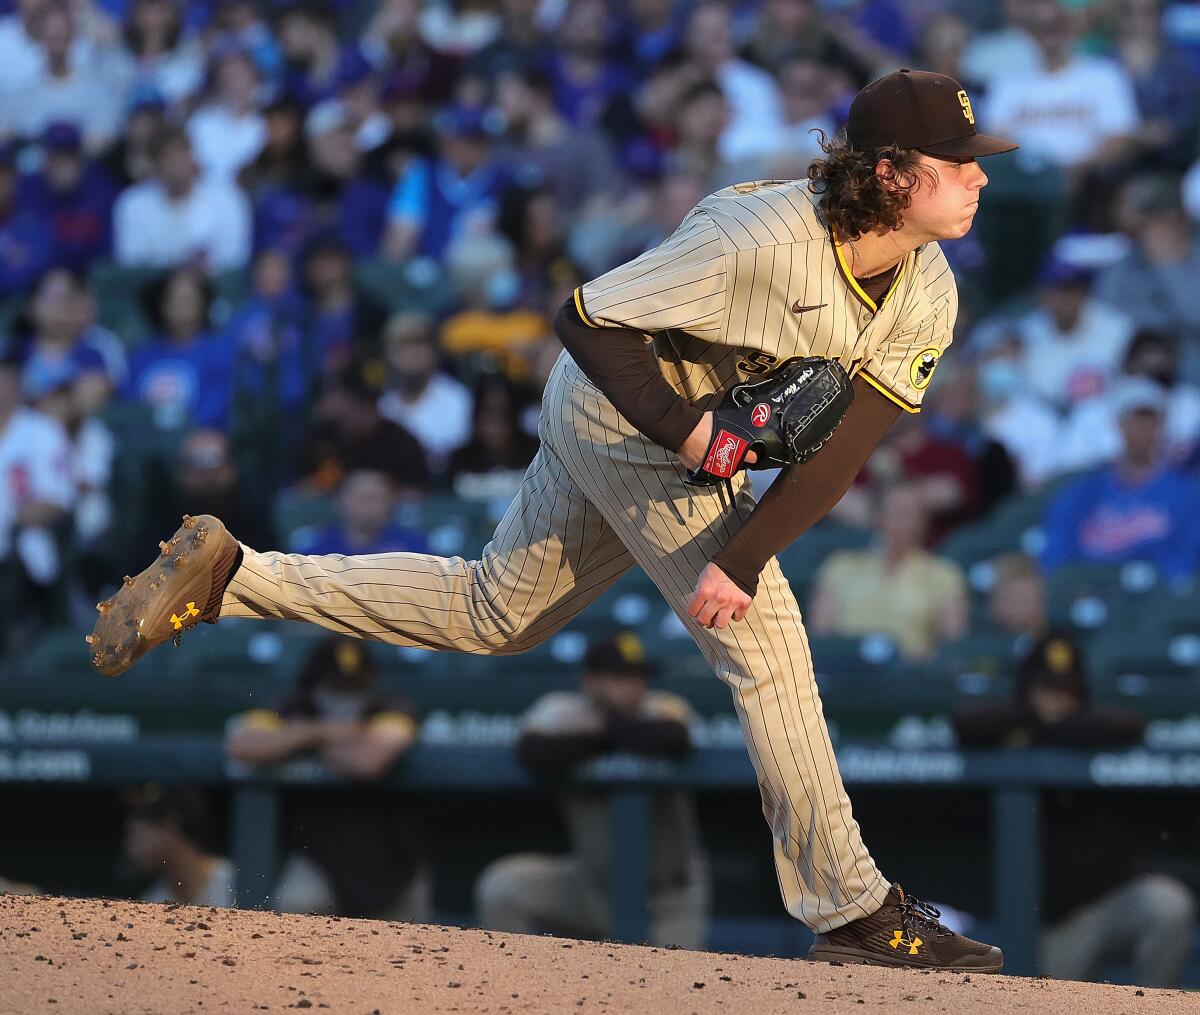 Ryan Weathers pitches for the Padres on June 1, 2021, against the Cubs at Wrigley Field.